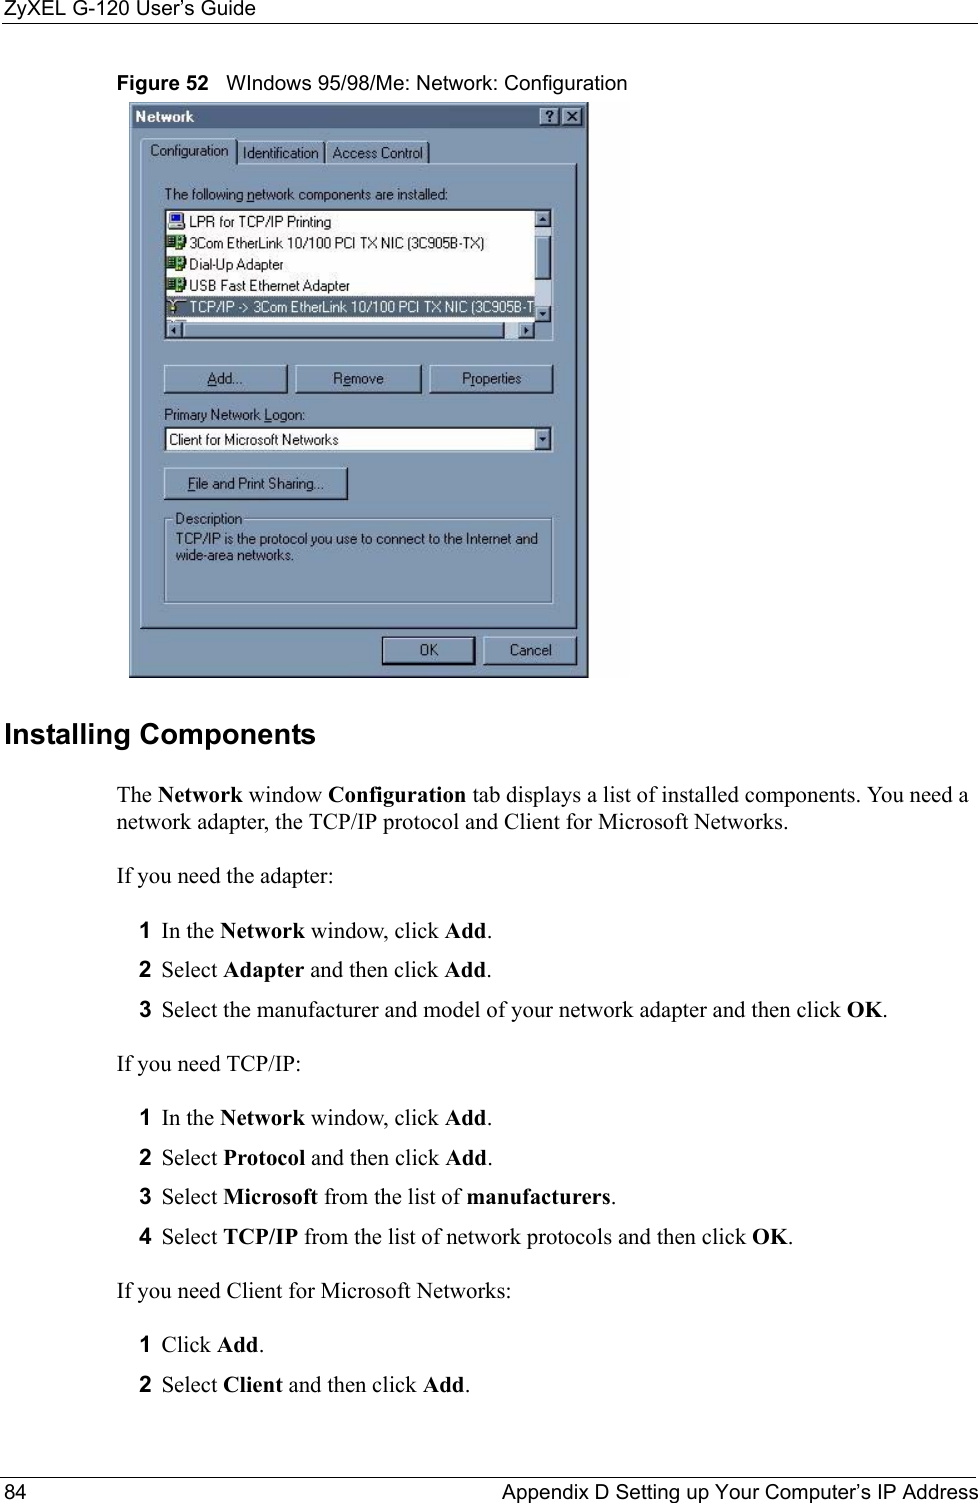 ZyXEL G-120 User’s Guide84 Appendix D Setting up Your Computer’s IP AddressFigure 52   WIndows 95/98/Me: Network: ConfigurationInstalling ComponentsThe Network window Configuration tab displays a list of installed components. You need a network adapter, the TCP/IP protocol and Client for Microsoft Networks.If you need the adapter:1In the Network window, click Add.2Select Adapter and then click Add.3Select the manufacturer and model of your network adapter and then click OK.If you need TCP/IP:1In the Network window, click Add.2Select Protocol and then click Add.3Select Microsoft from the list of manufacturers.4Select TCP/IP from the list of network protocols and then click OK.If you need Client for Microsoft Networks:1Click Add.2Select Client and then click Add.